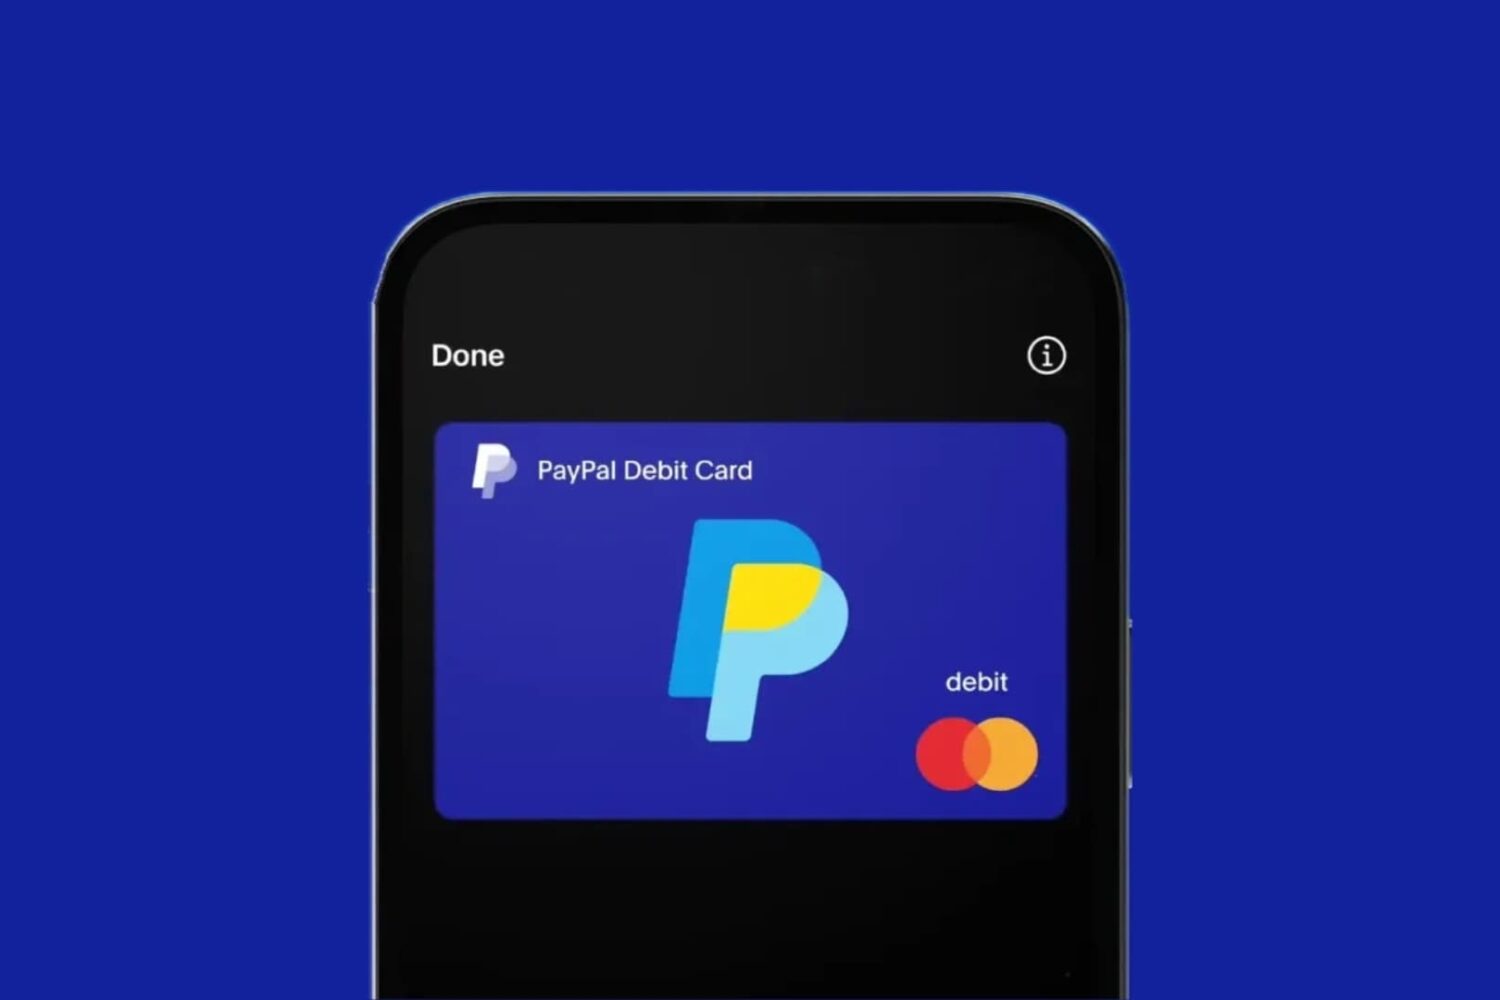 Apple Wallet with PayPal debit card.